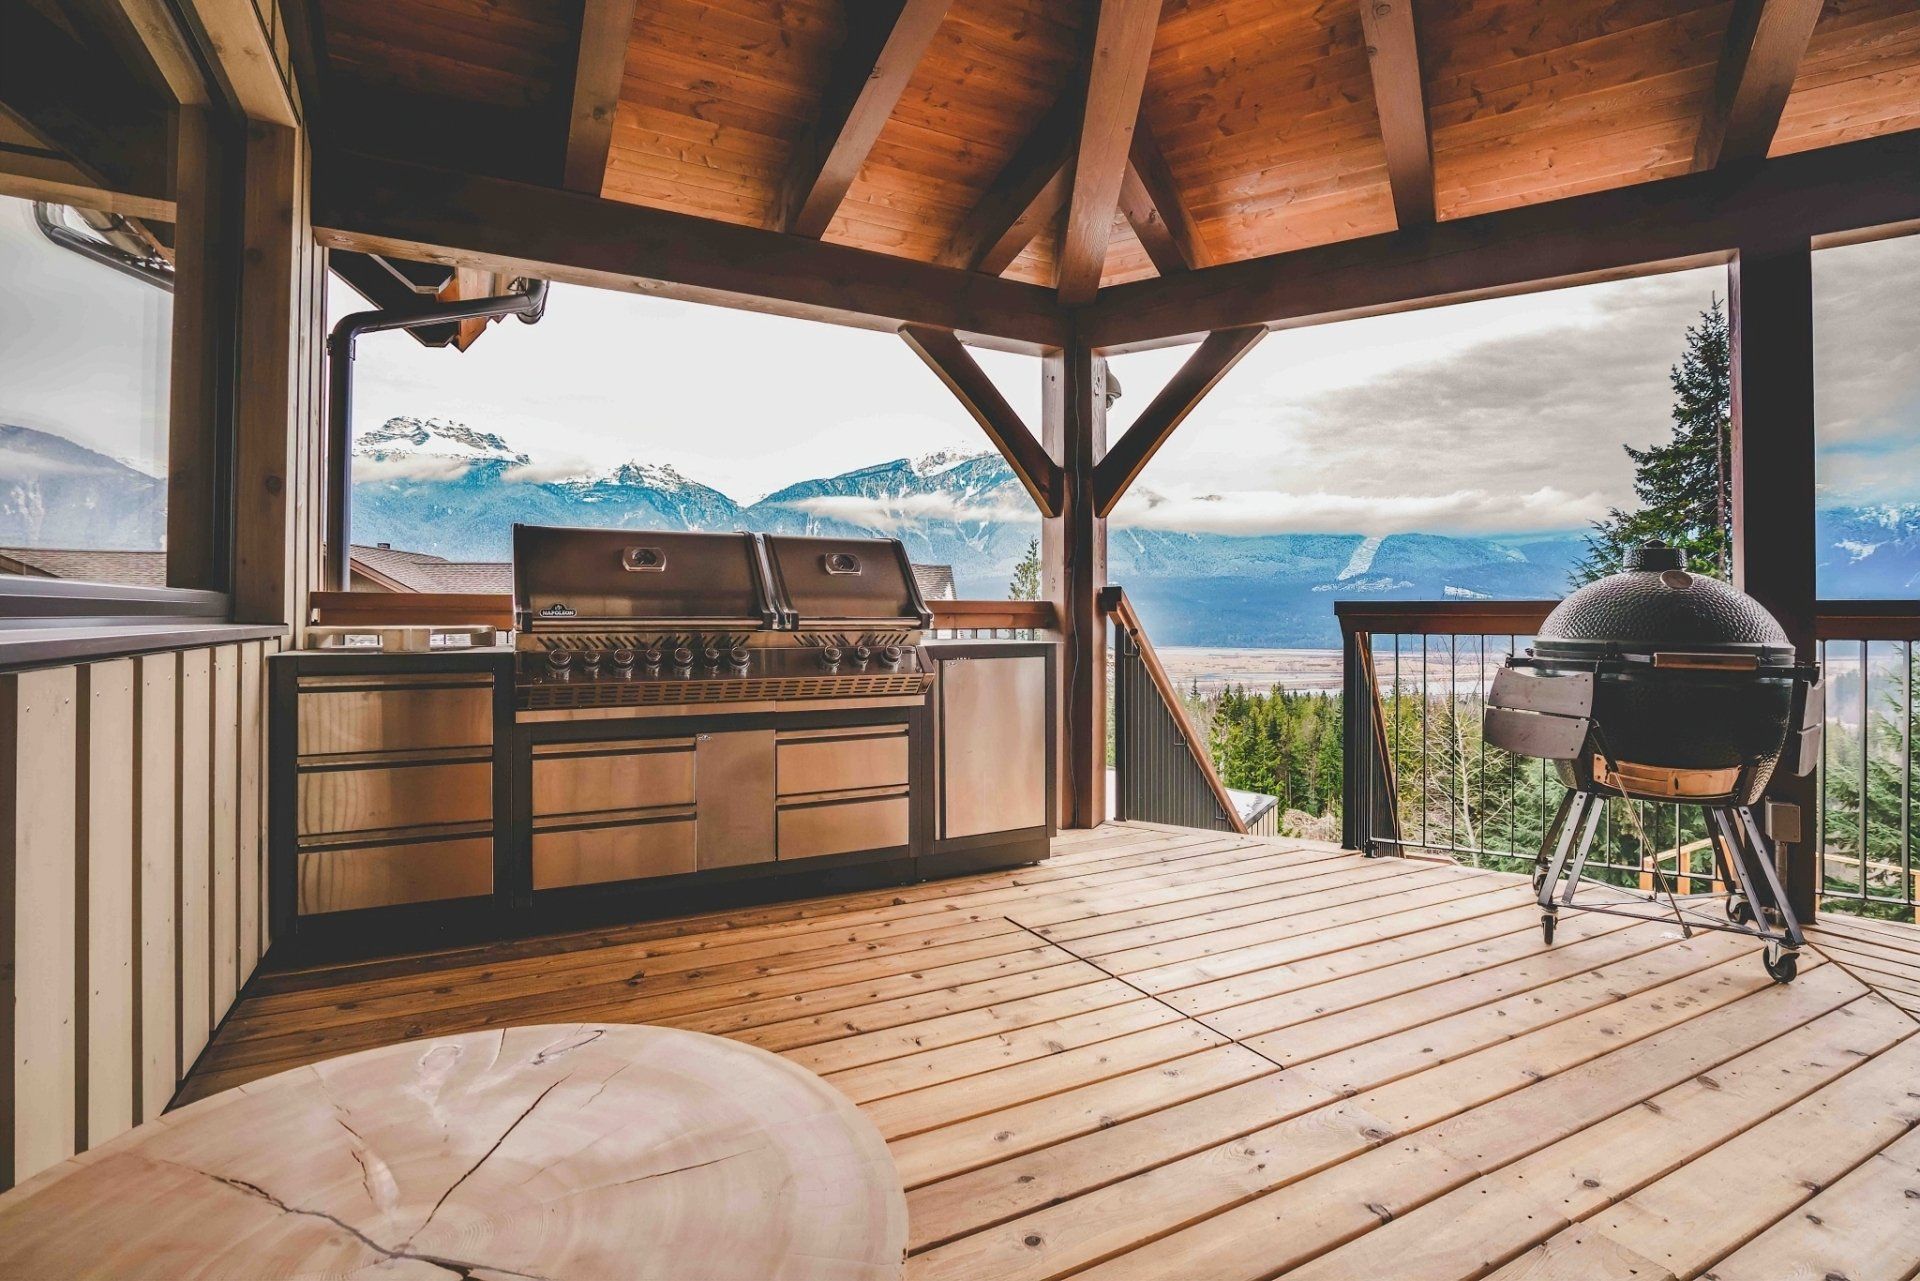 Outdoor grilling area at Flying Moose Chalet, Revelstoke, BC